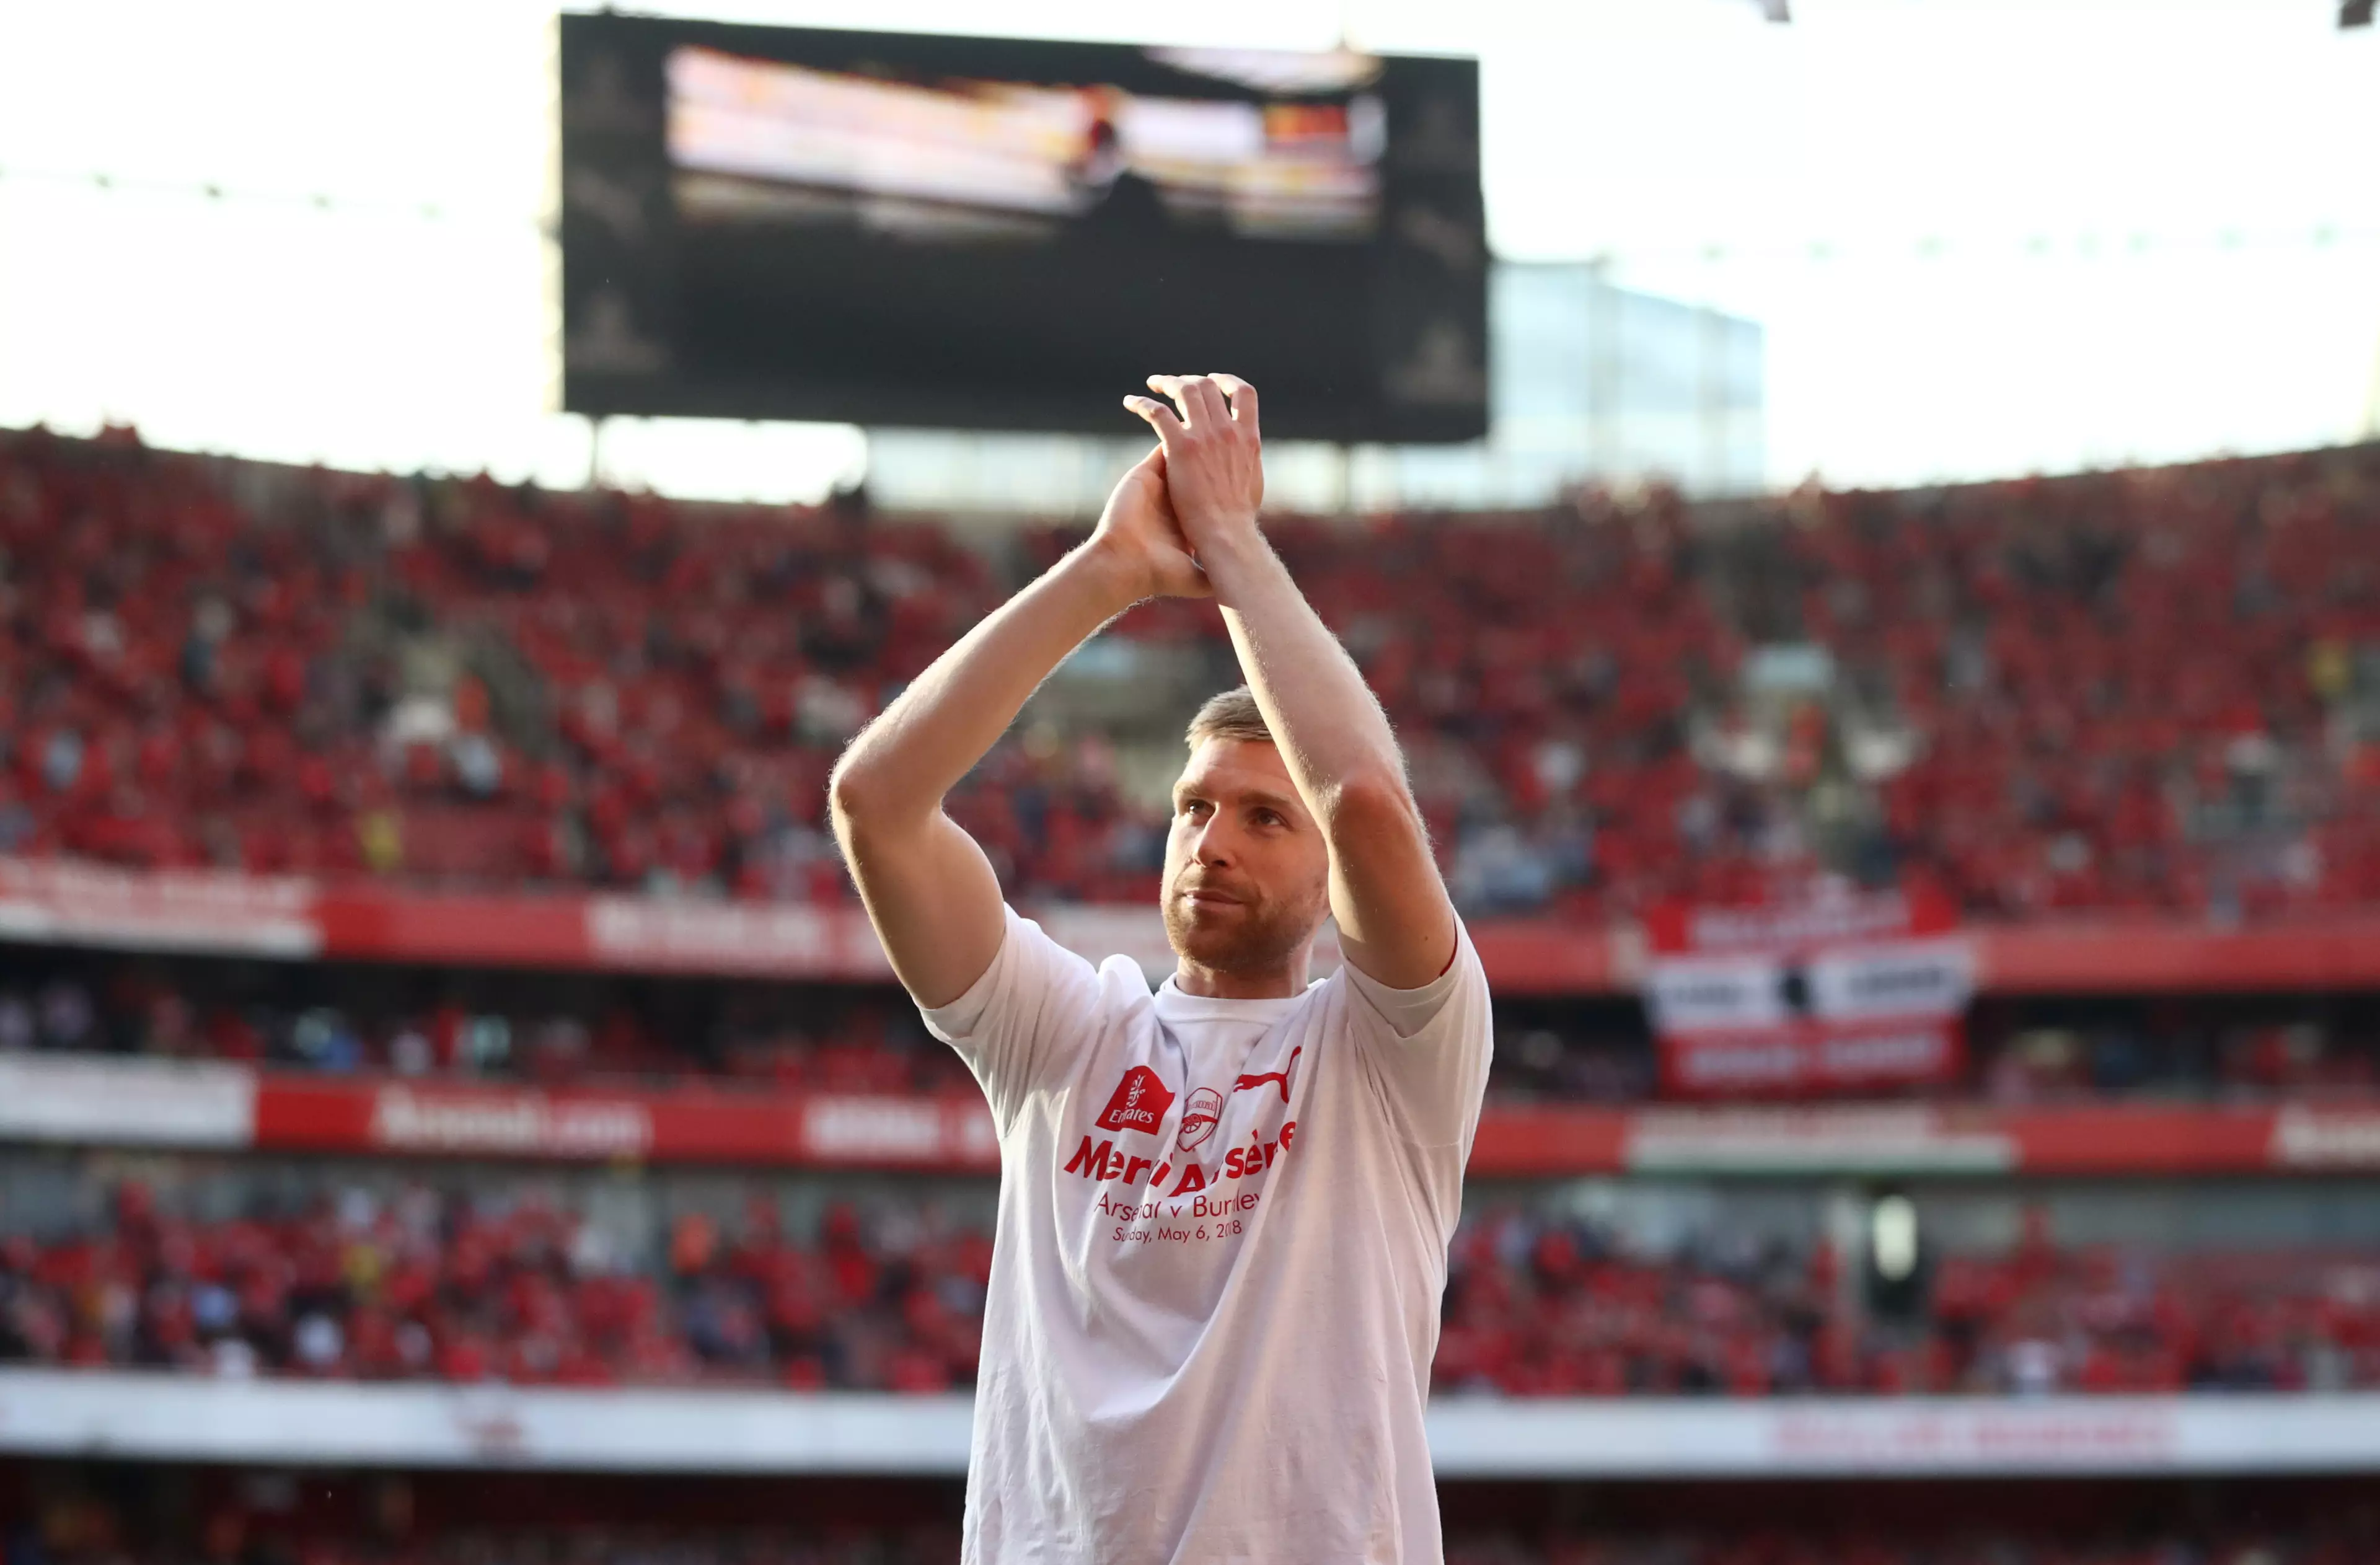 Mertesacker Candidly Reveals Mental Health Issues He Experienced Due To Football